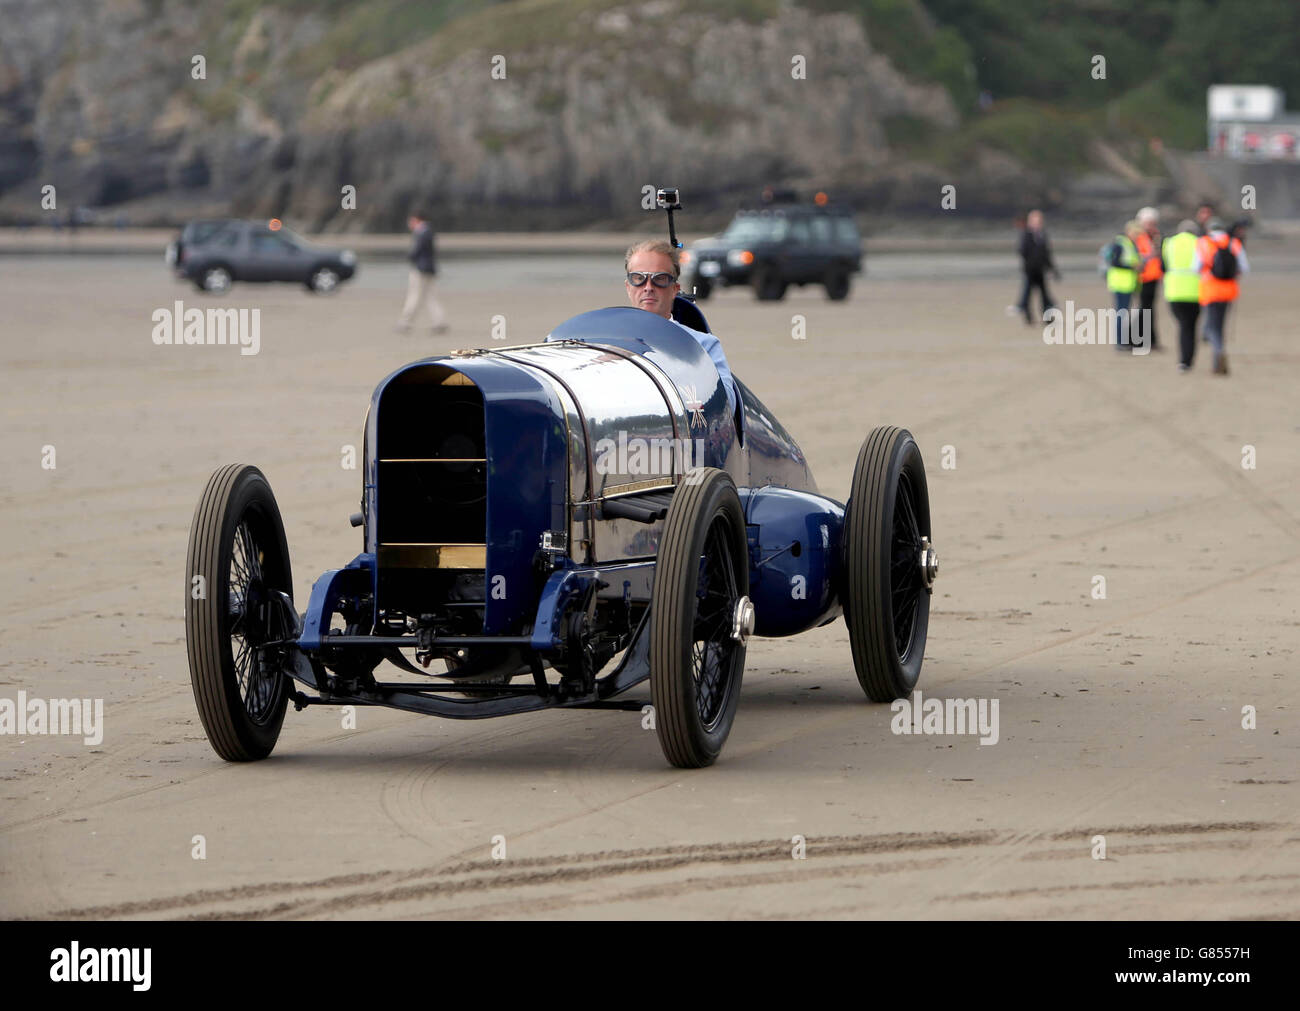 Sir Malcom Campbell's grandson Don Wales drives his grandfather's historic Sunbeam car nicknamed Bluebird on Pendine sands in Wales where the vehicle reached 150mph ago today. PRESS ASSOCIATION Photo. Picture date: Tuesday July 21, 2015. To mark the occasion, Don made a low-speed run in the vehicle. Photo credit should read: Steve Parsons/PA Wire Stock Photo